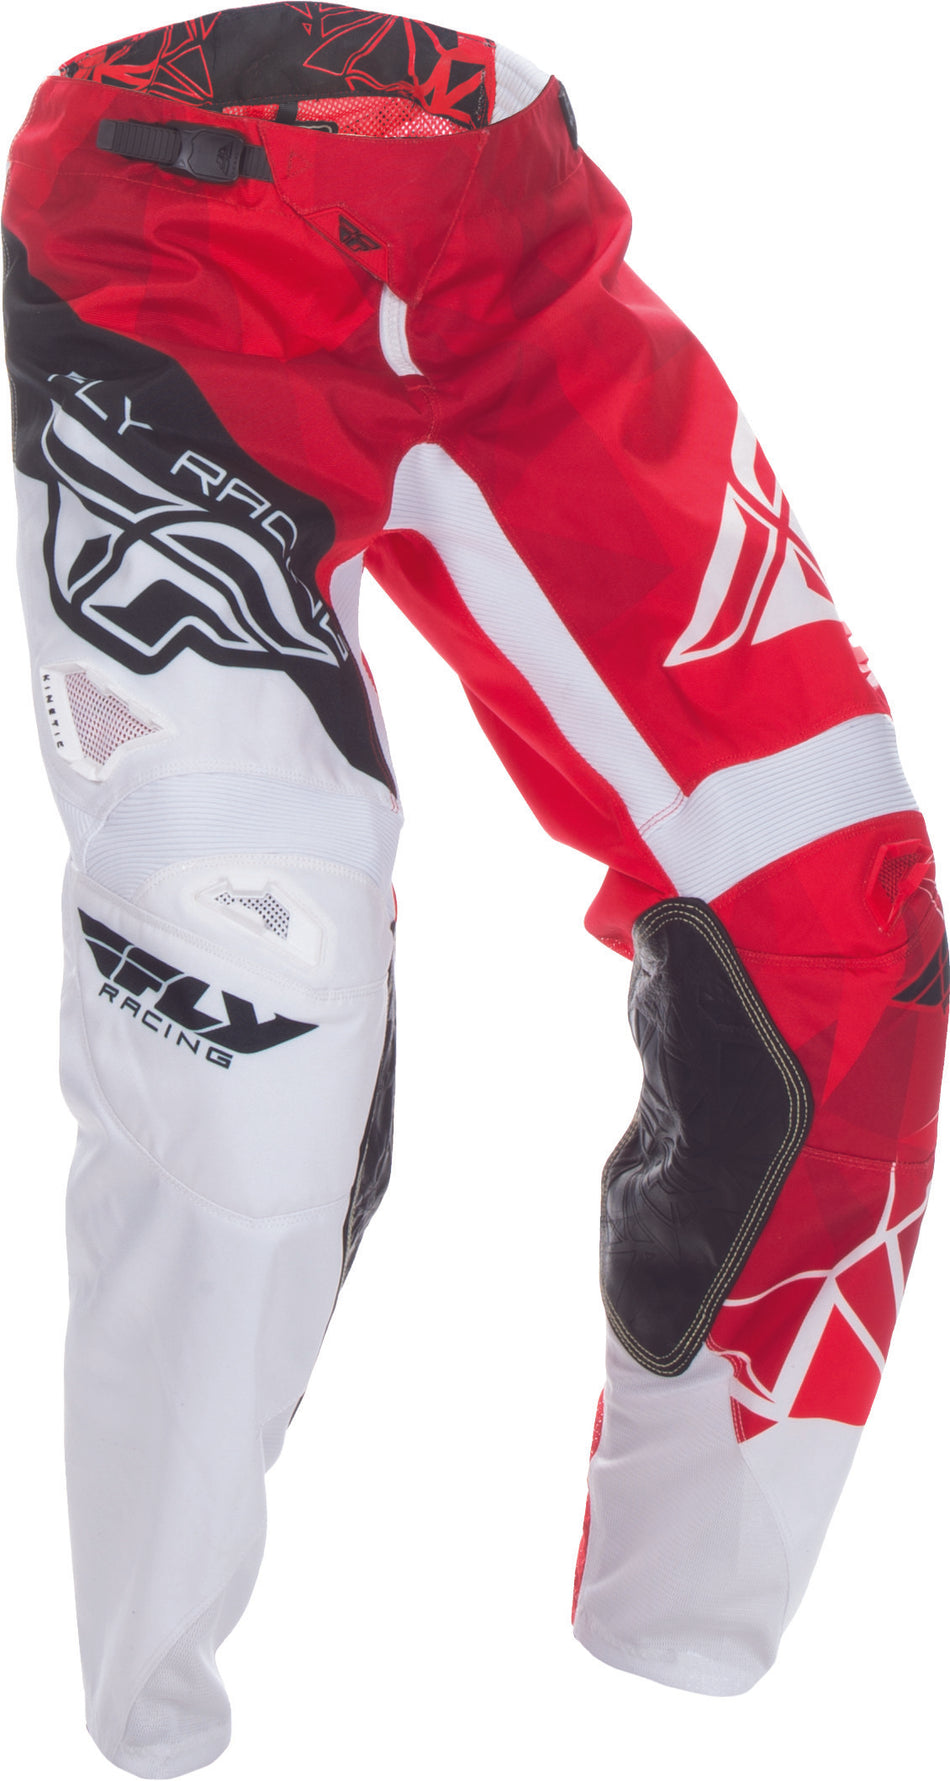 FLY RACING Kinetic Crux Pant Red/White Sz 18 370-53218